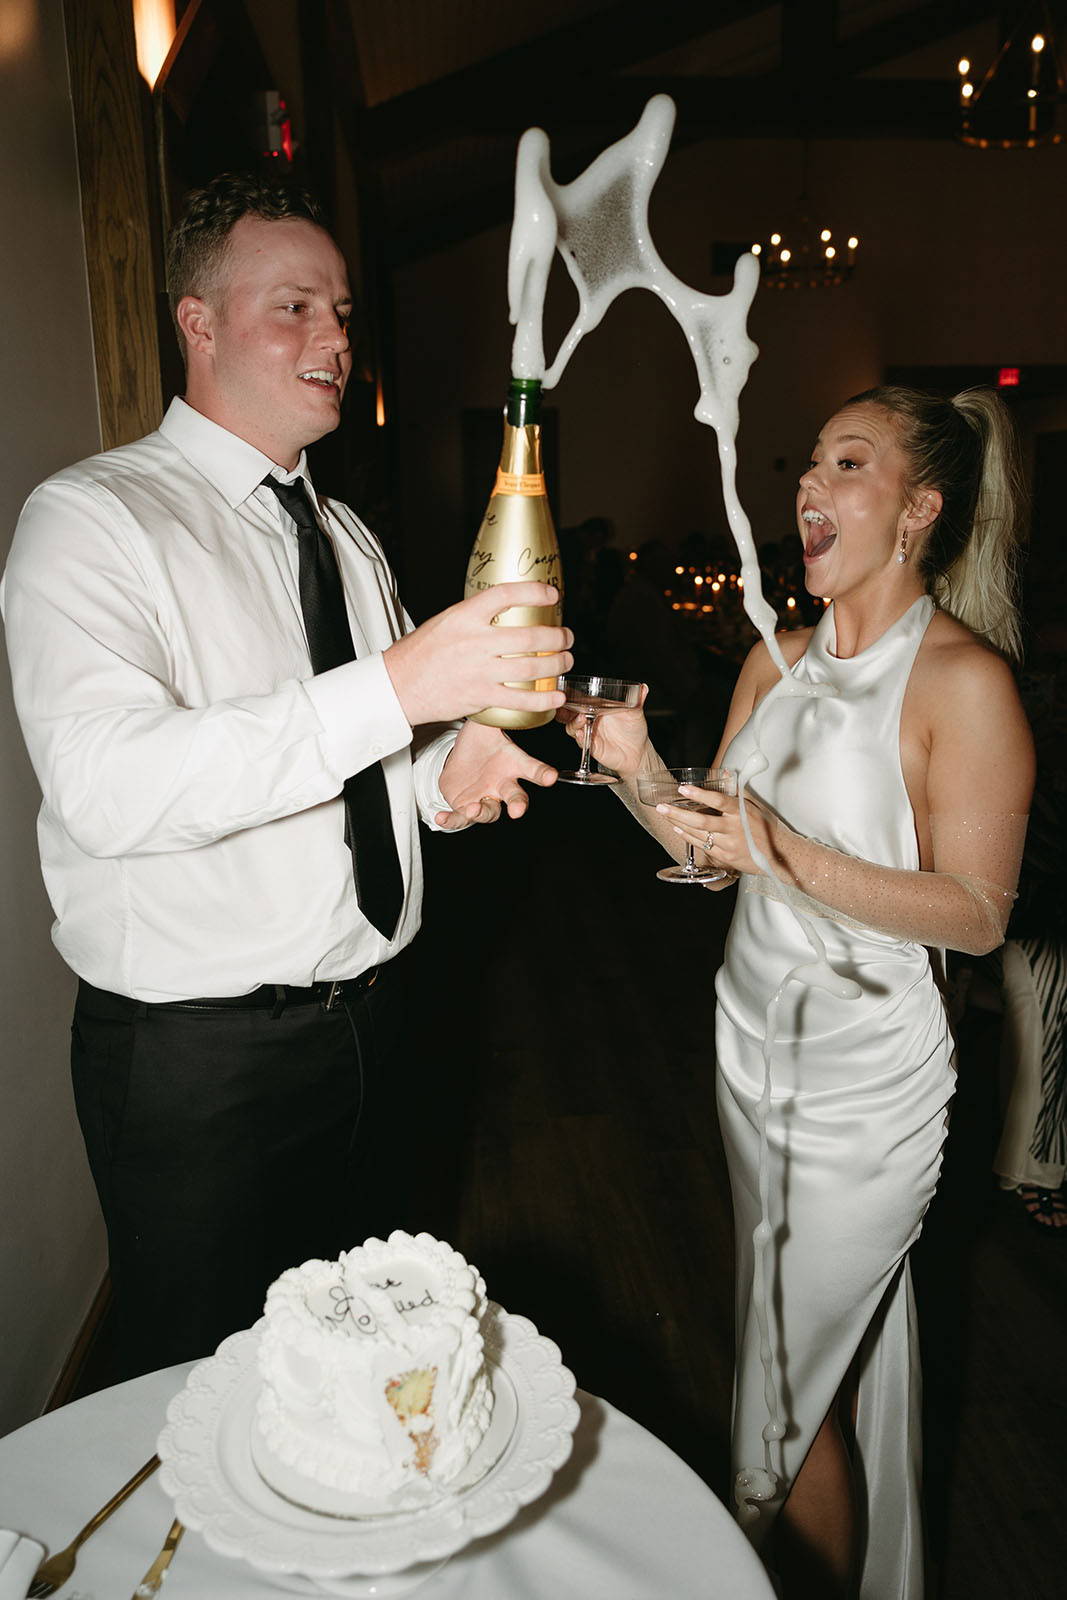 Joyful bride and groom sharing a delightful moment, bursting into laughter as the groom pops open a champagne bottle